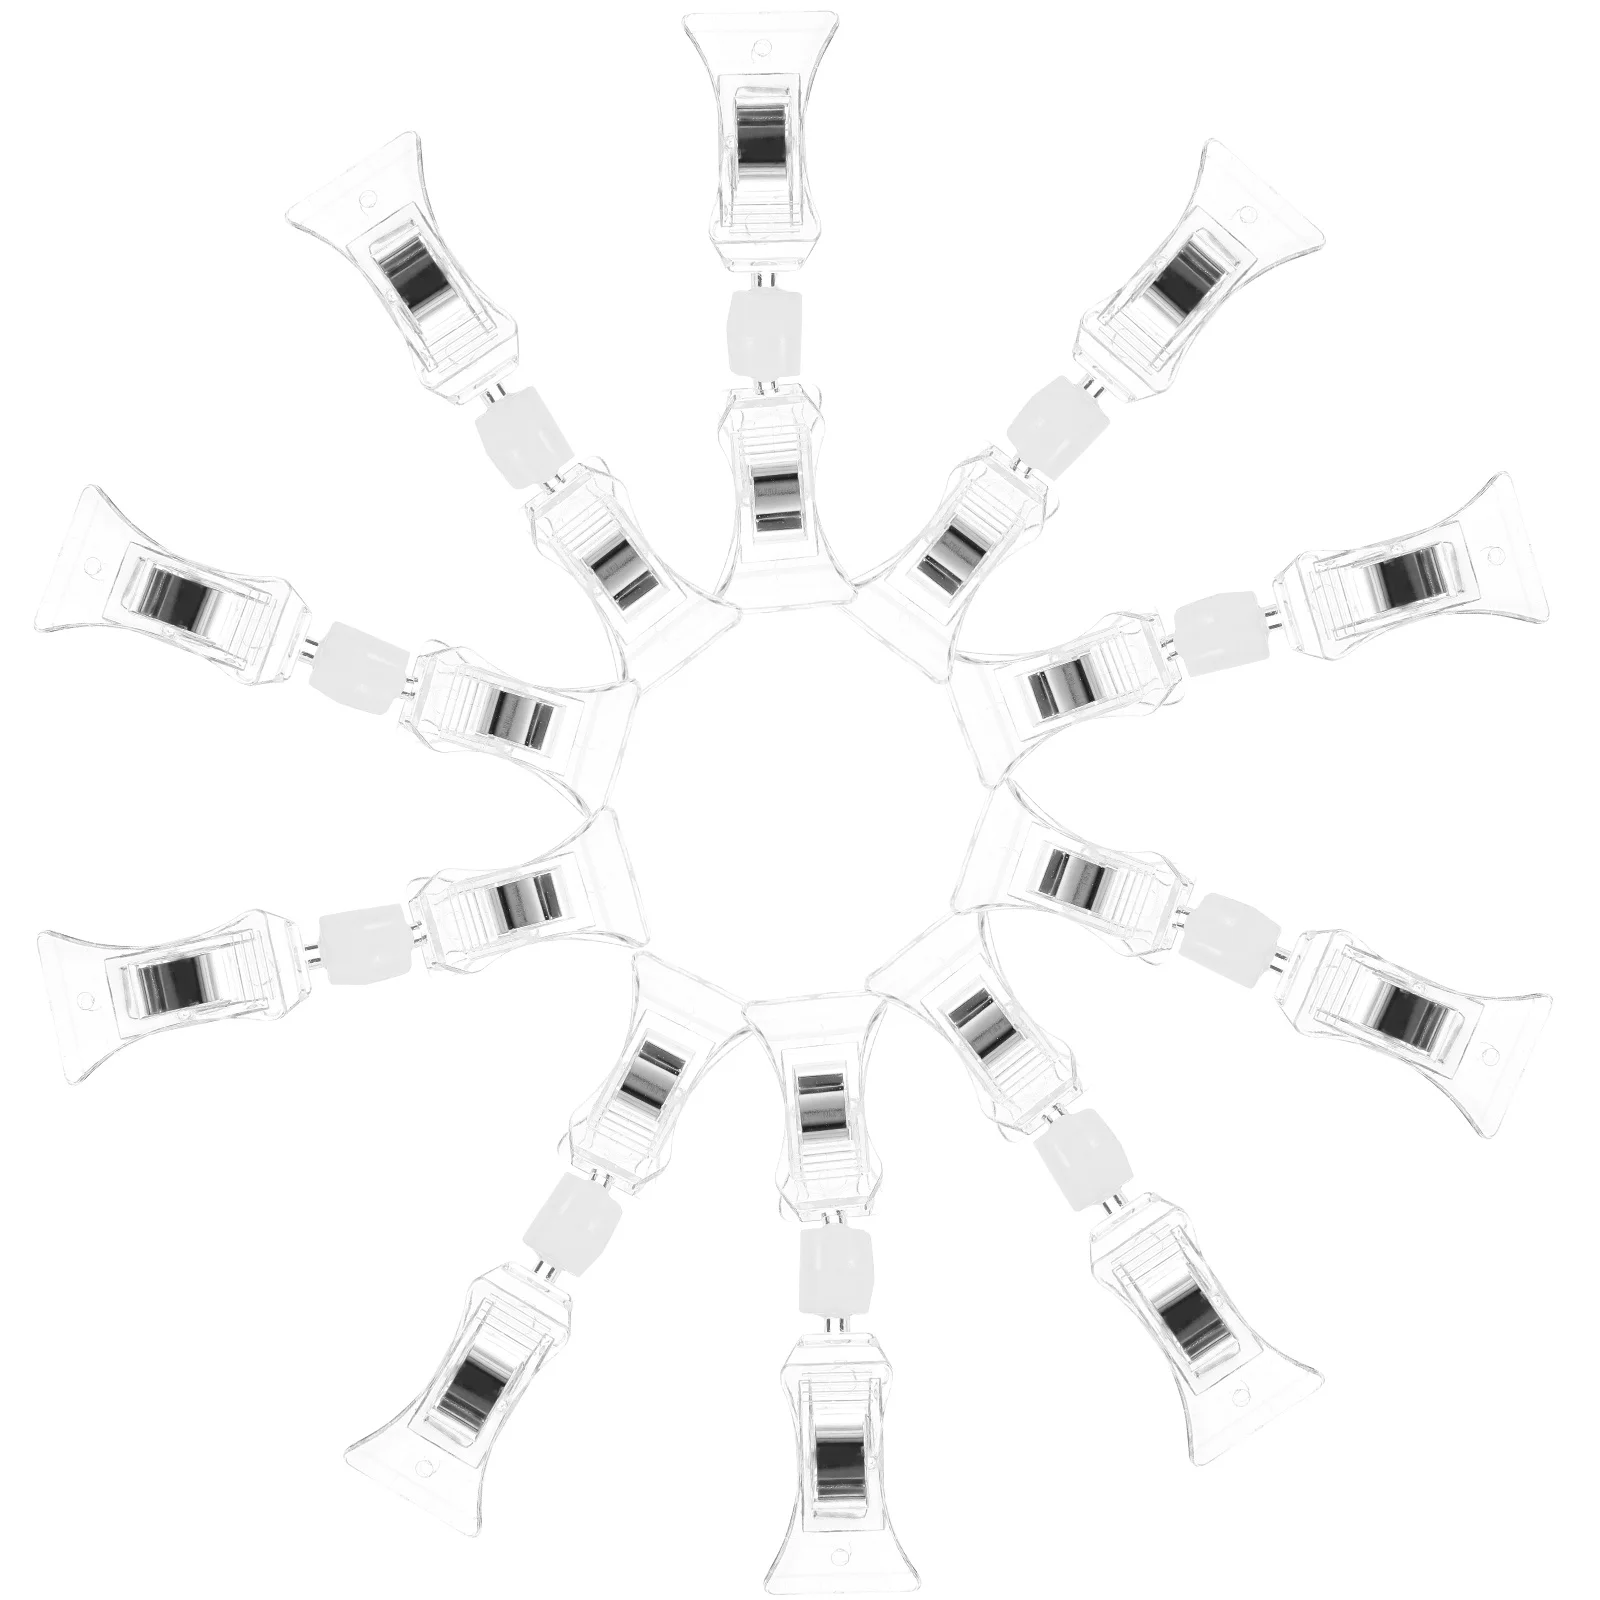 10 Pcs Advertising Double-headed Clip Plastic Sign Holder Retail Store Supplies Tags Holders Clothing Labels Clear Clips Sided 10 pcs tags advertising double headed clip retail store supplies clear sign holder white multi function holders sided clips